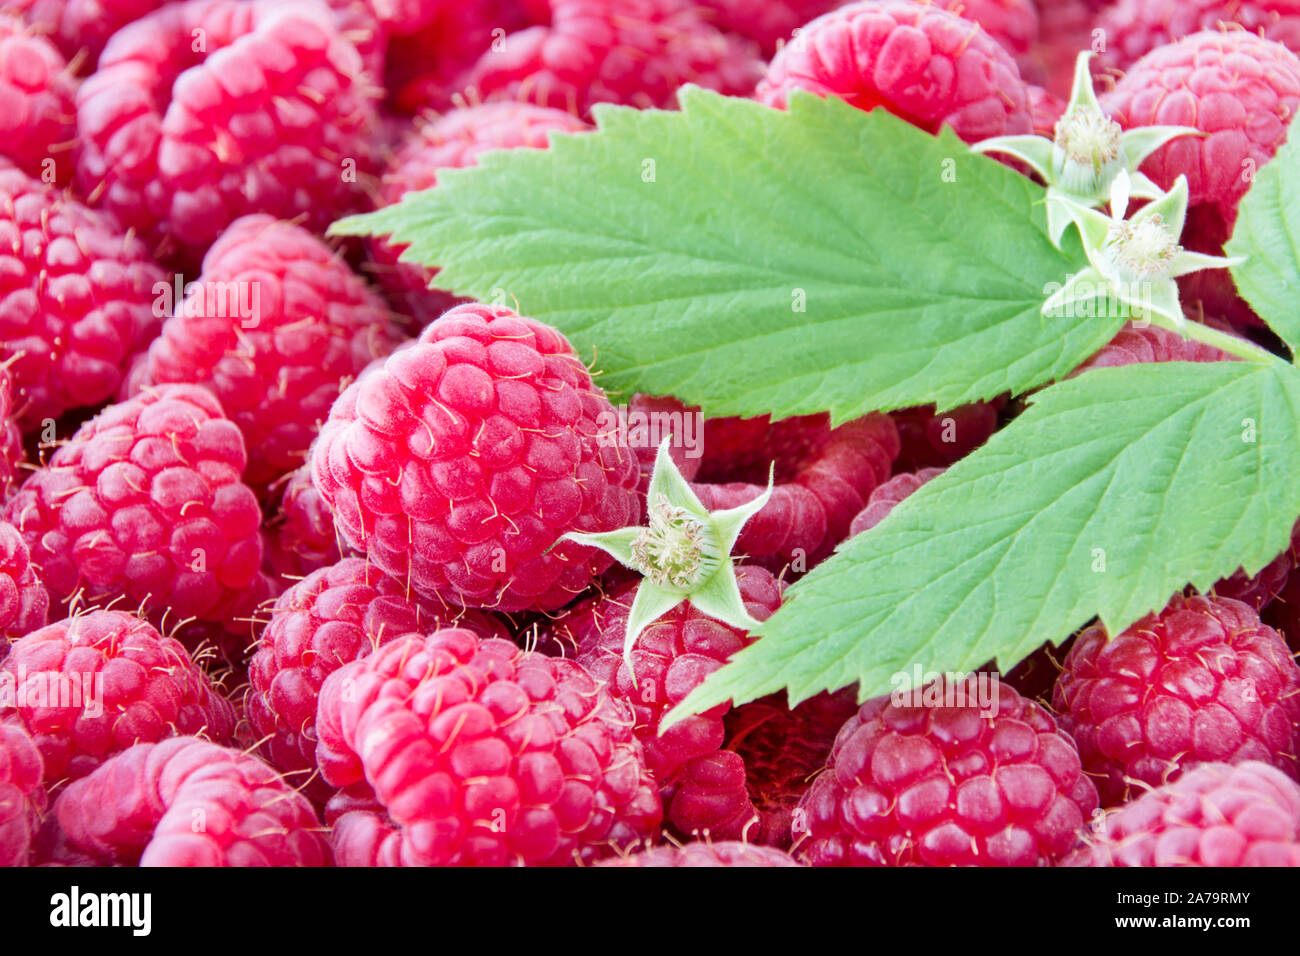 Raspberries background with leafes Stock Photo